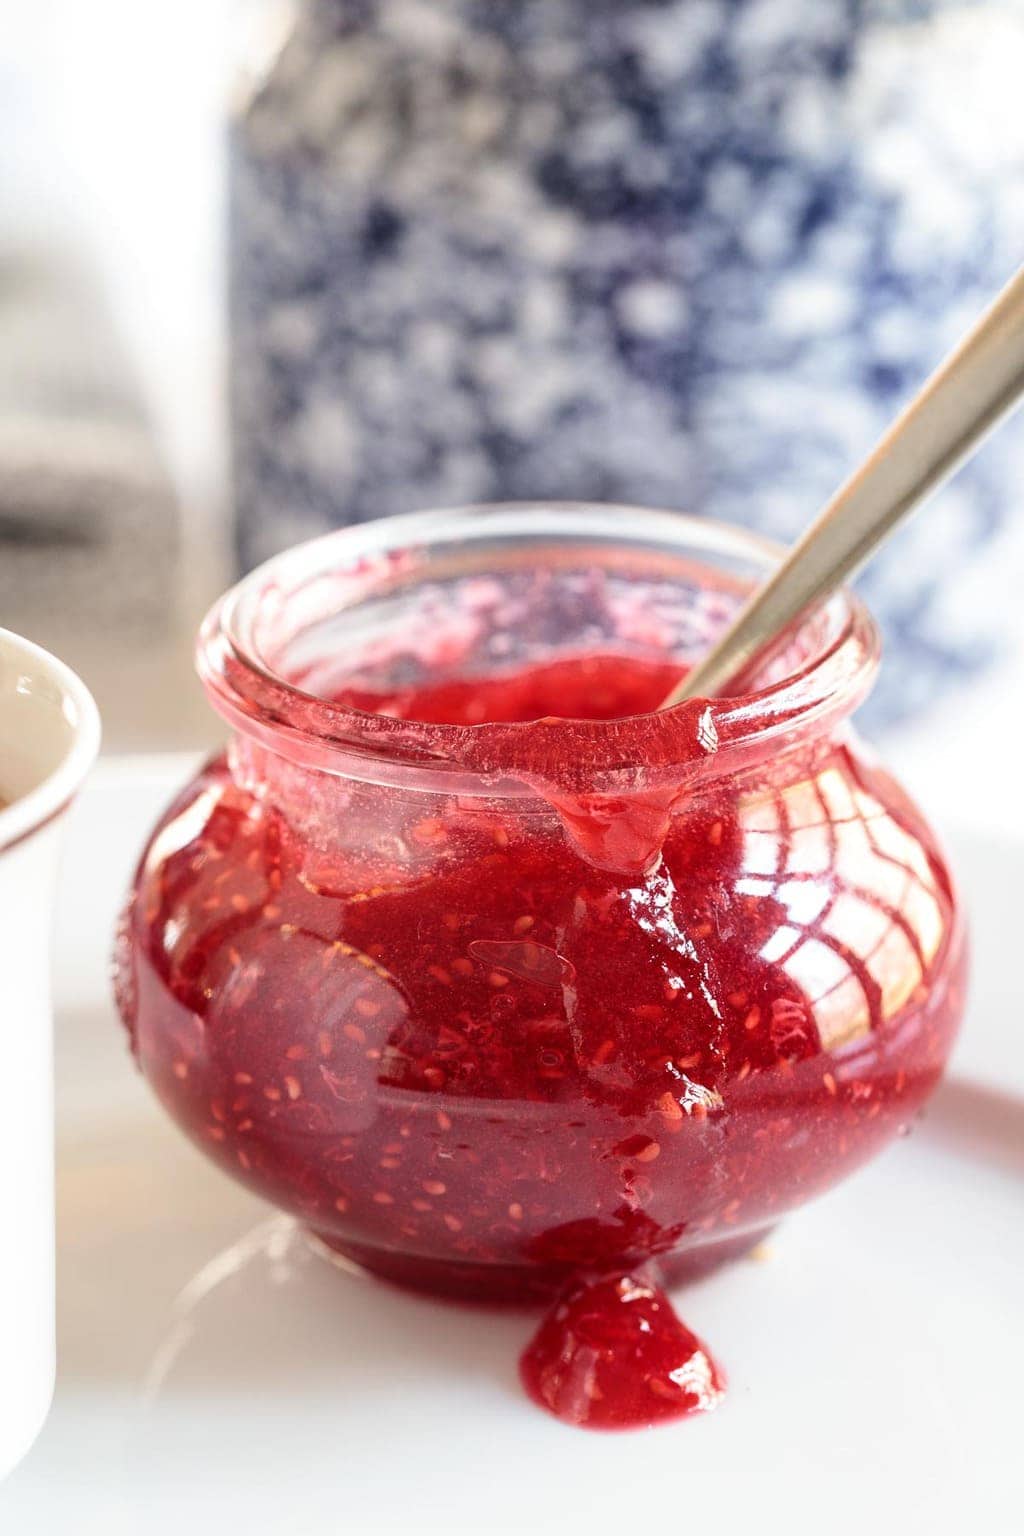 A photo of a Weck canning jar filled with raspberry jam with blue and white canisters in the background.